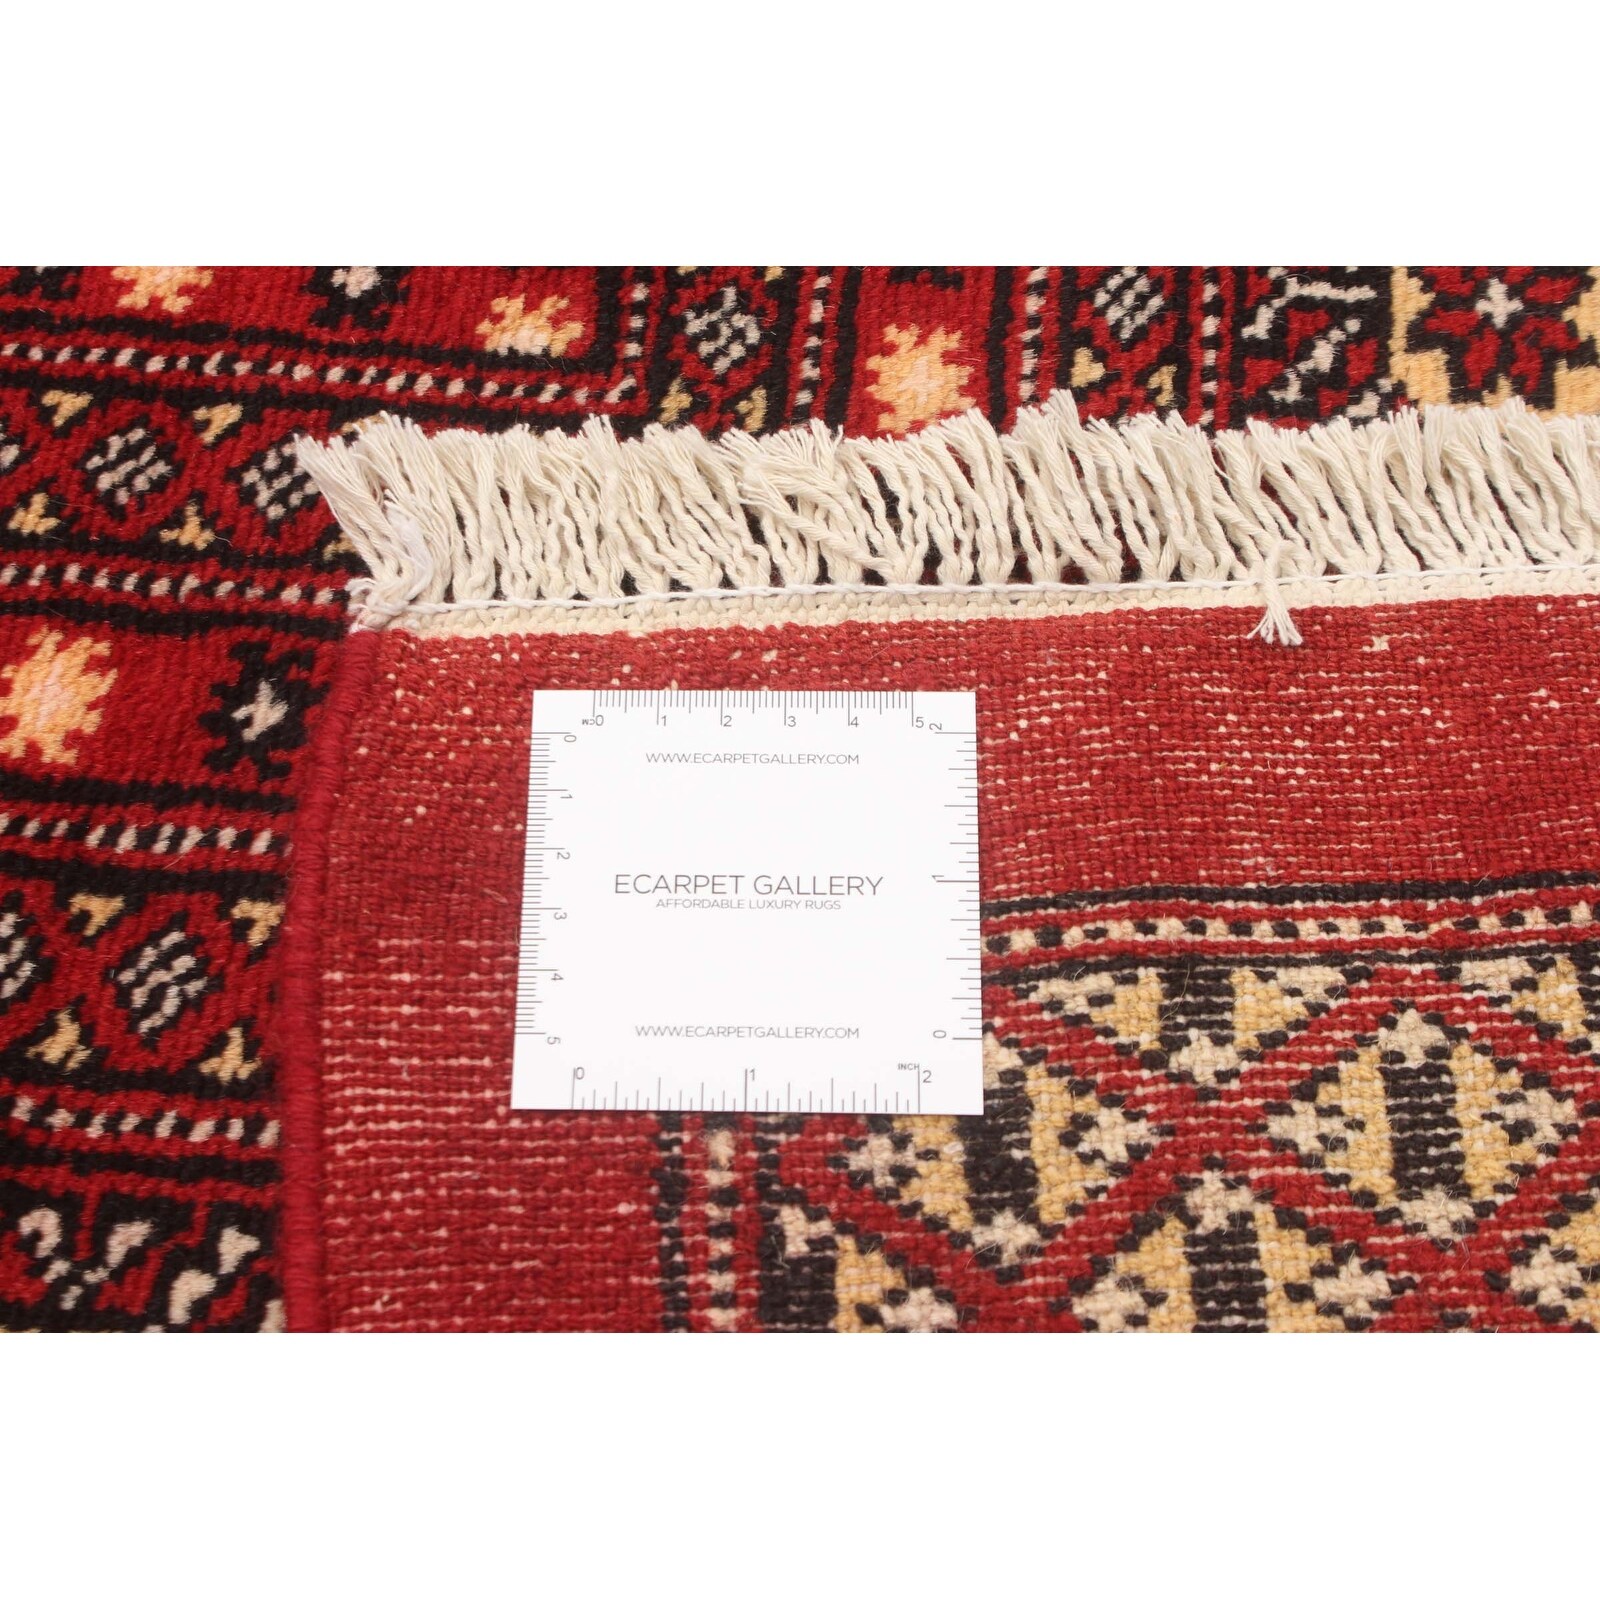 363161 Bedroom Finest Peshawar Bokhara Bordered Red Rug 8'11 x 12'0 Hand-Knotted Wool Rug eCarpet Gallery Large Area Rug for Living Room 